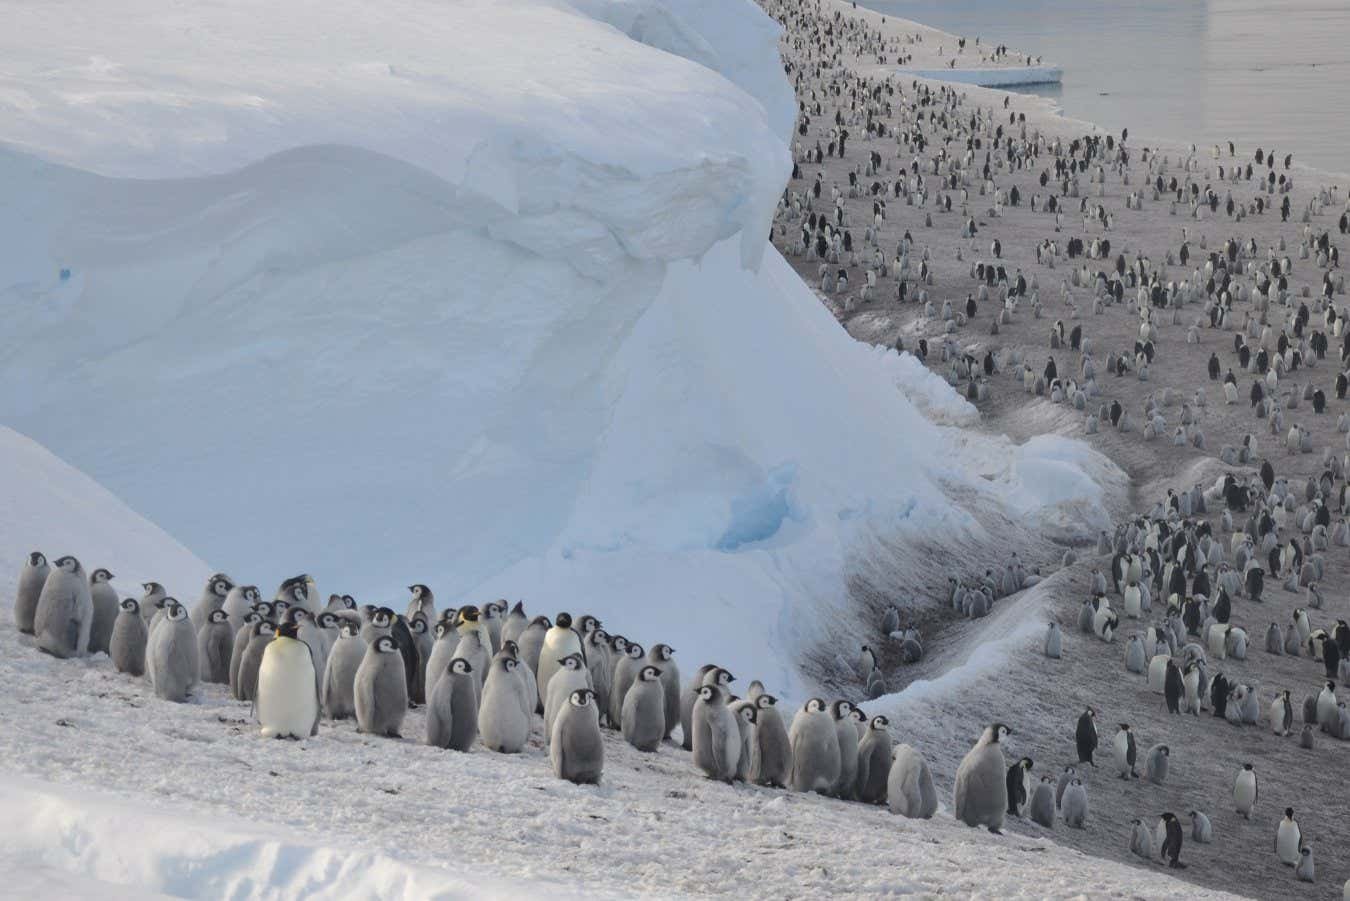 Four new emperor penguin colonies have been discovered